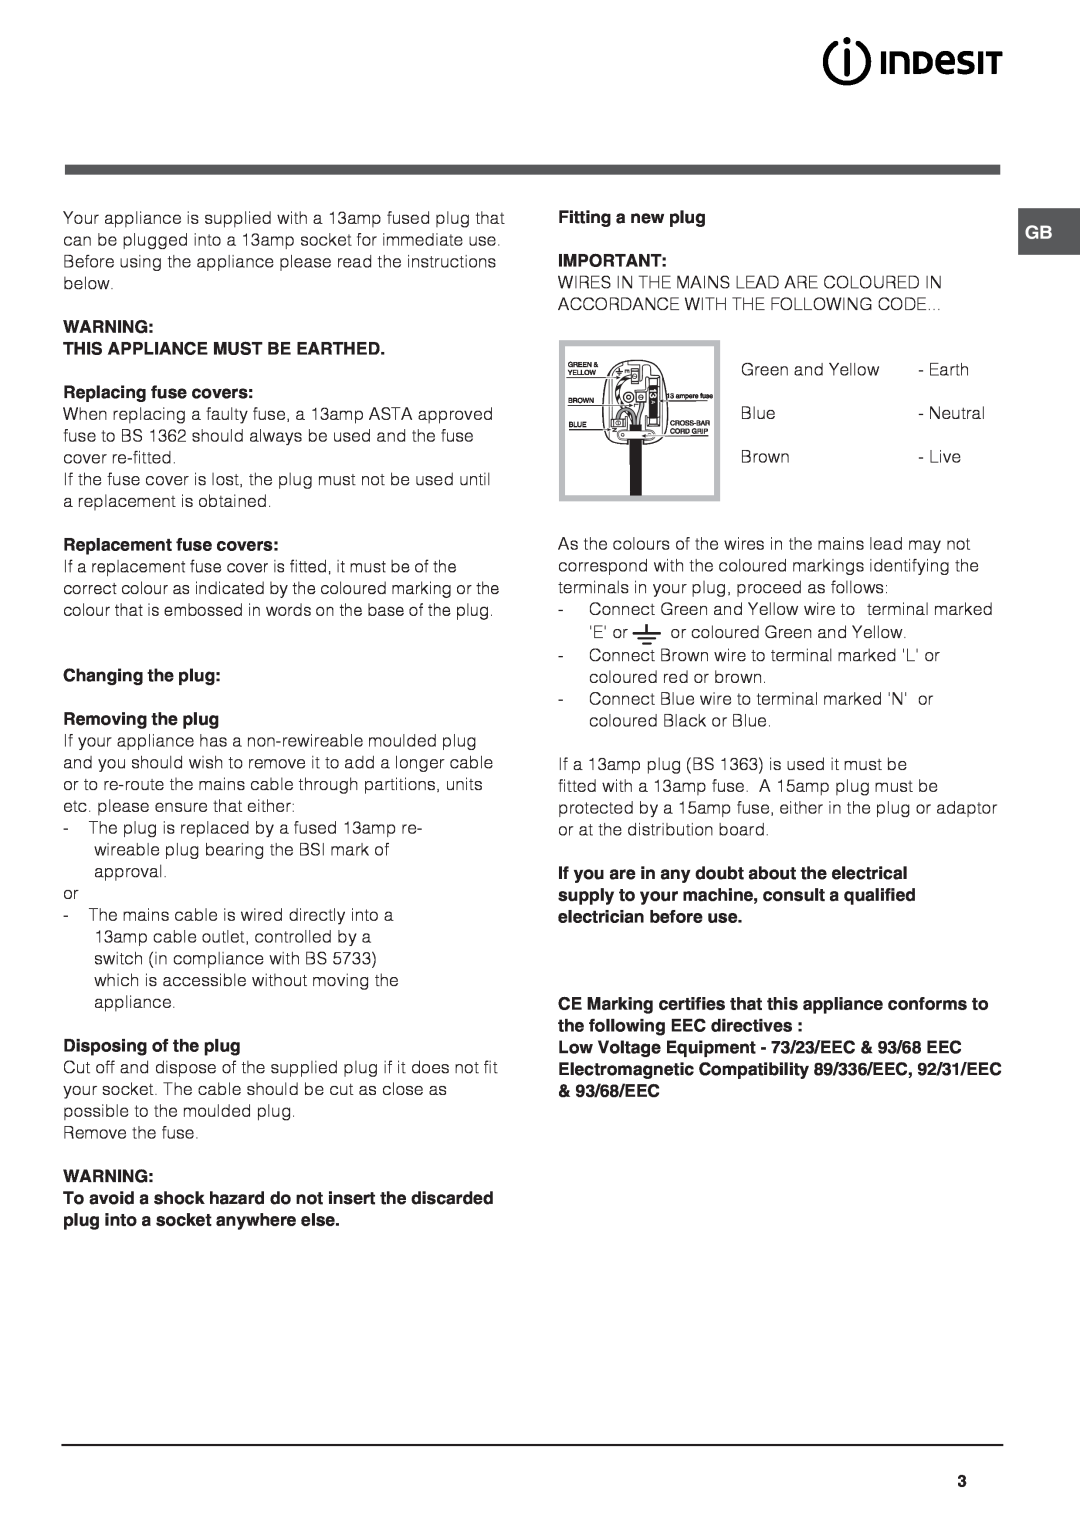 Indesit CA 55 XX manual This Appliance Must Be Earthed 